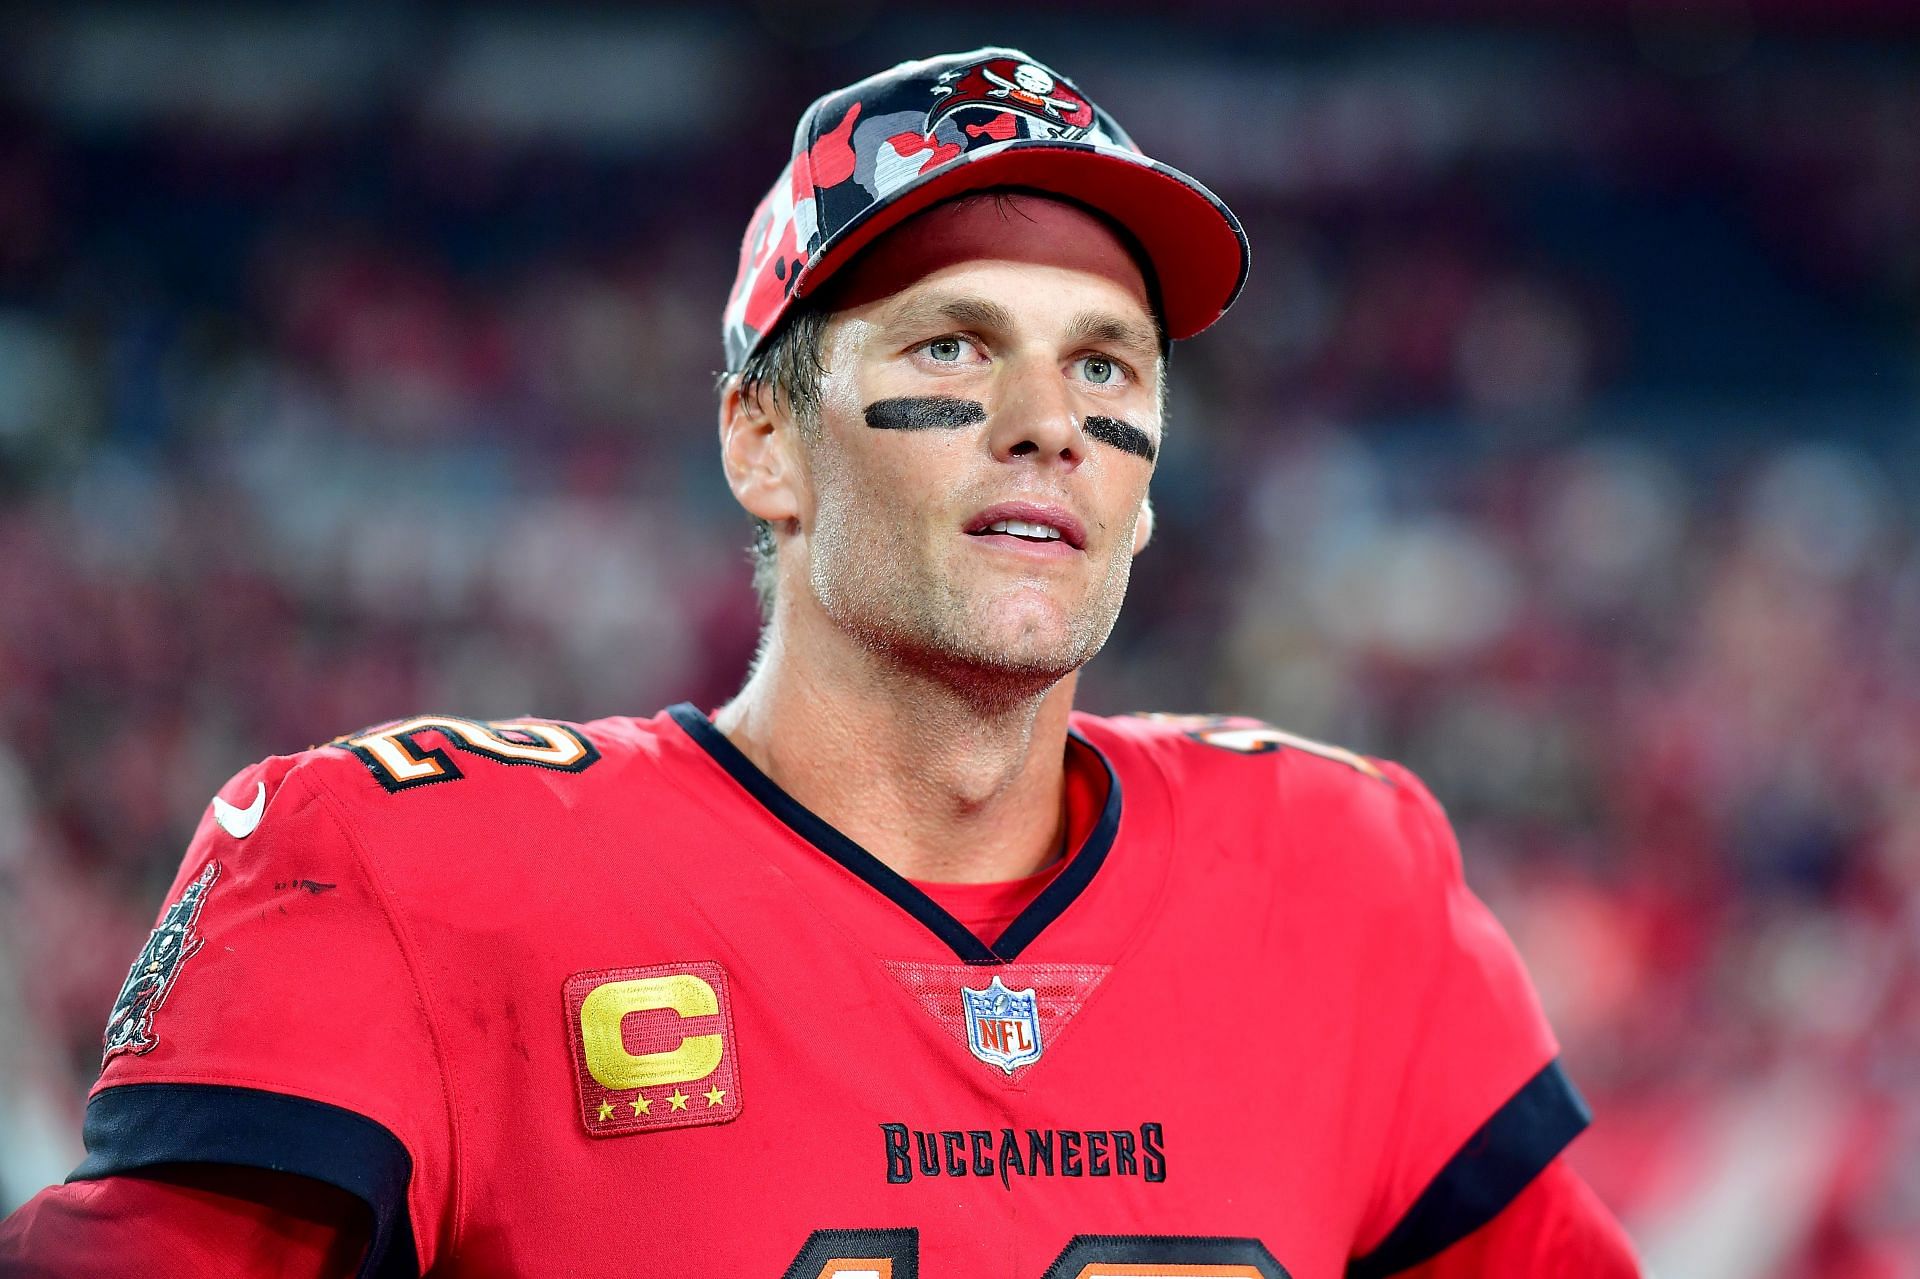 Tom Brady's Friends, Family Show Him Hometown Support Against 49ers